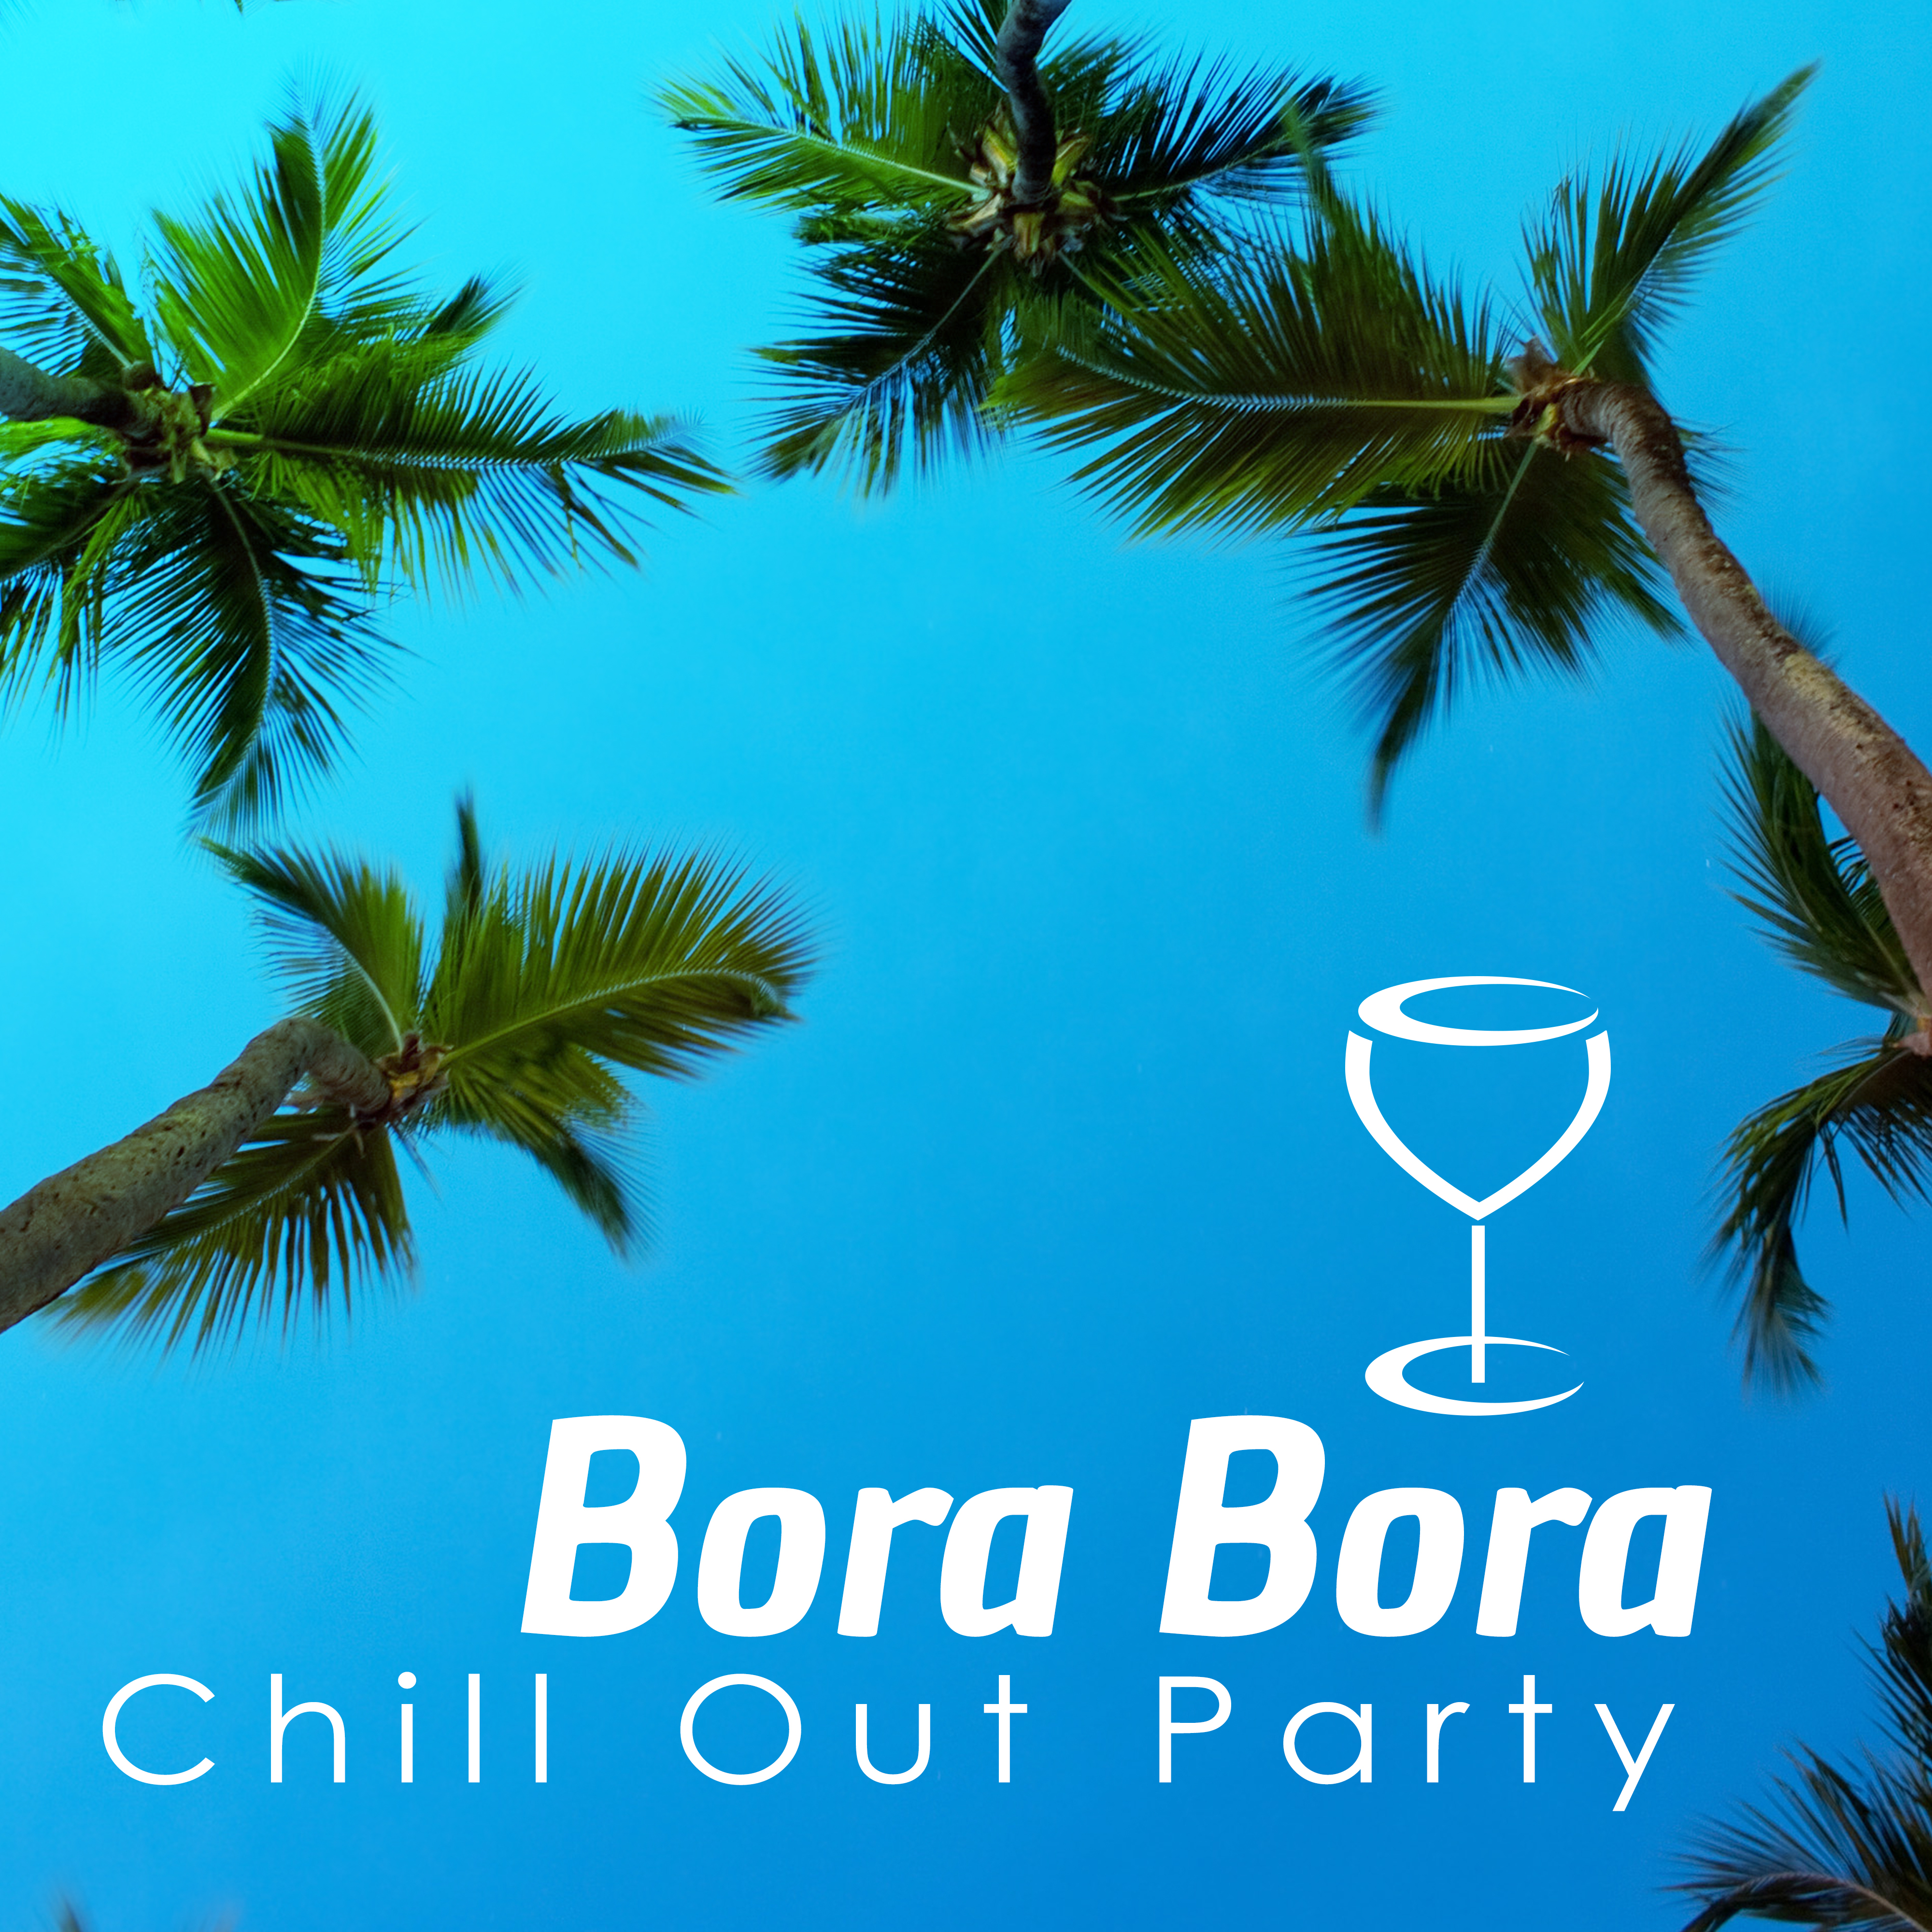 Bora Bora Chill Out Party – Summer Music 2017, **** Dance, Party Time, Lounge Tunes